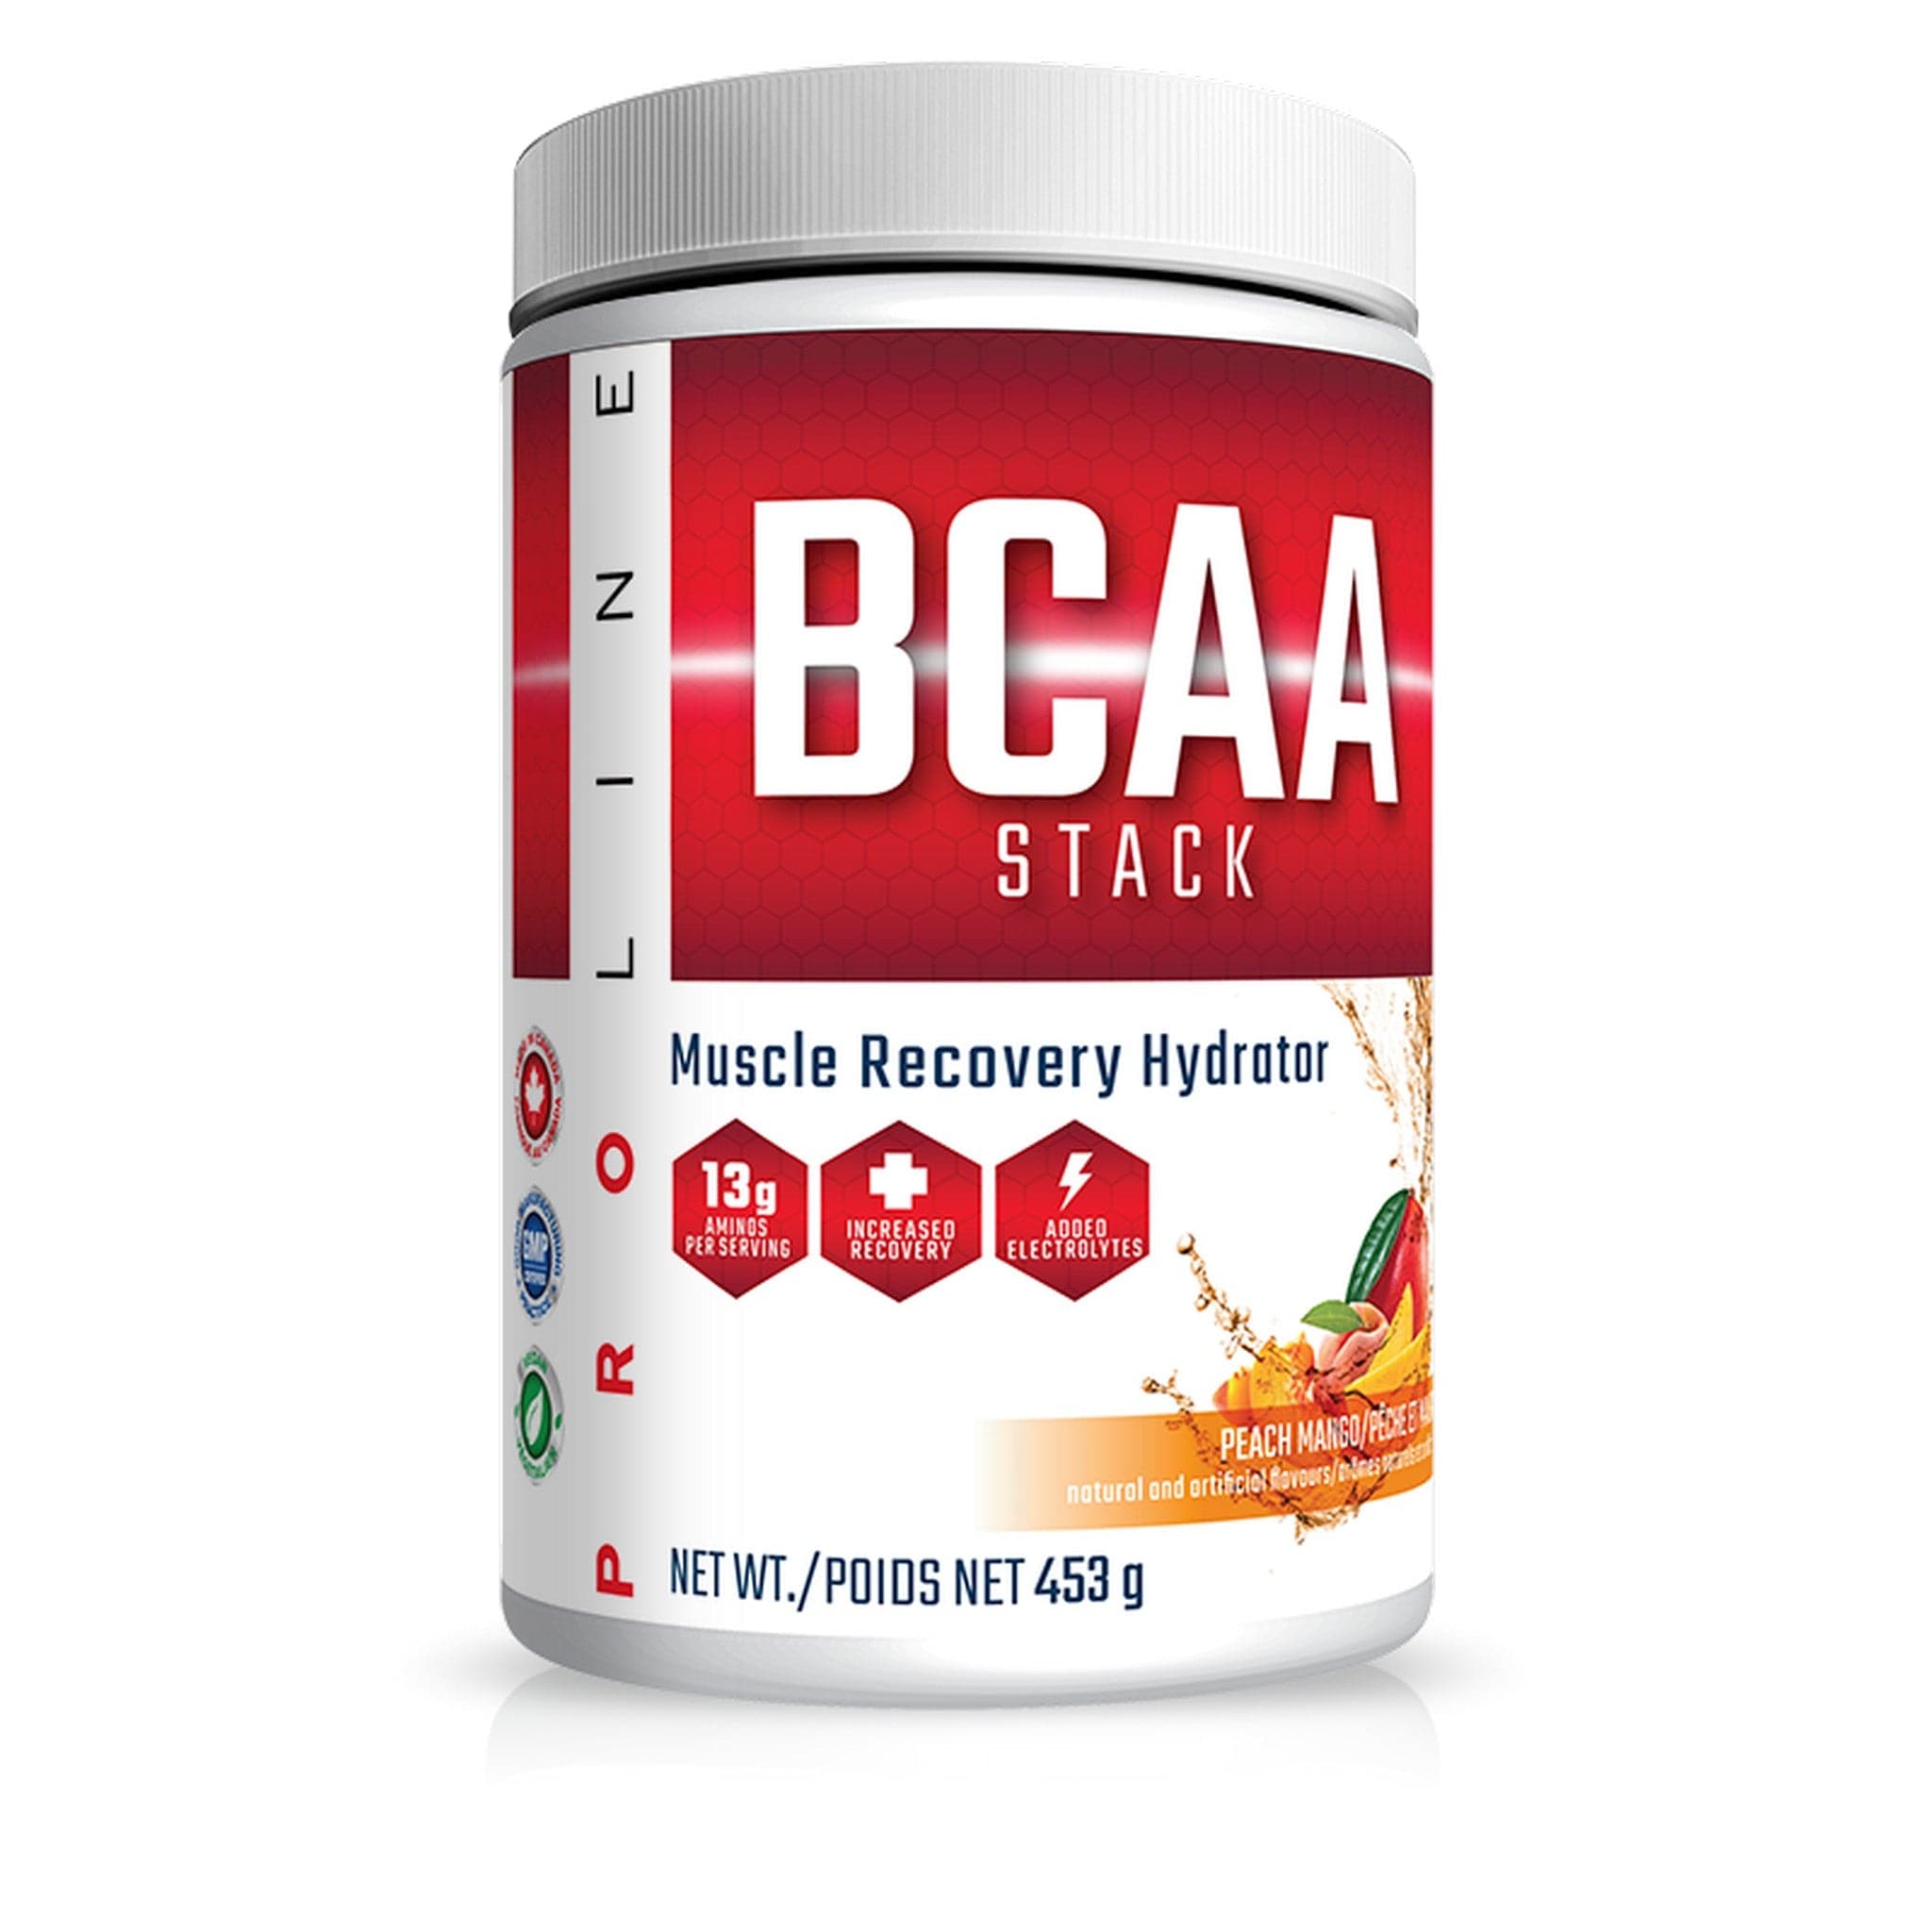 Proline BCAA Stack 30 portions